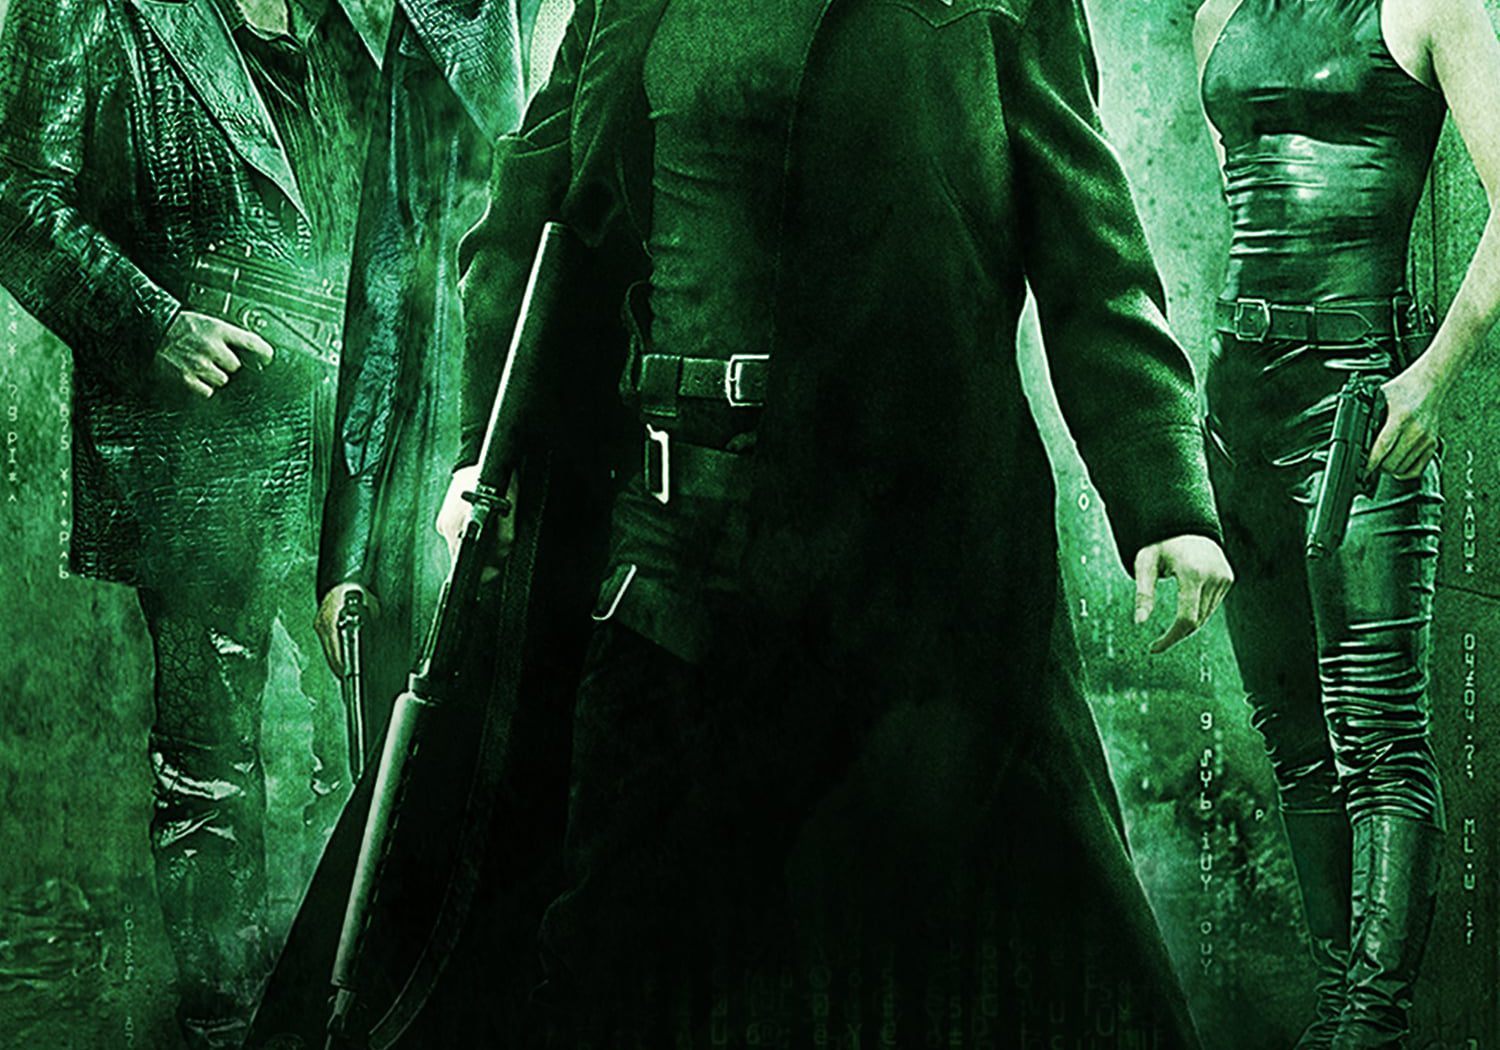 Poster for the movie "The Matrix"